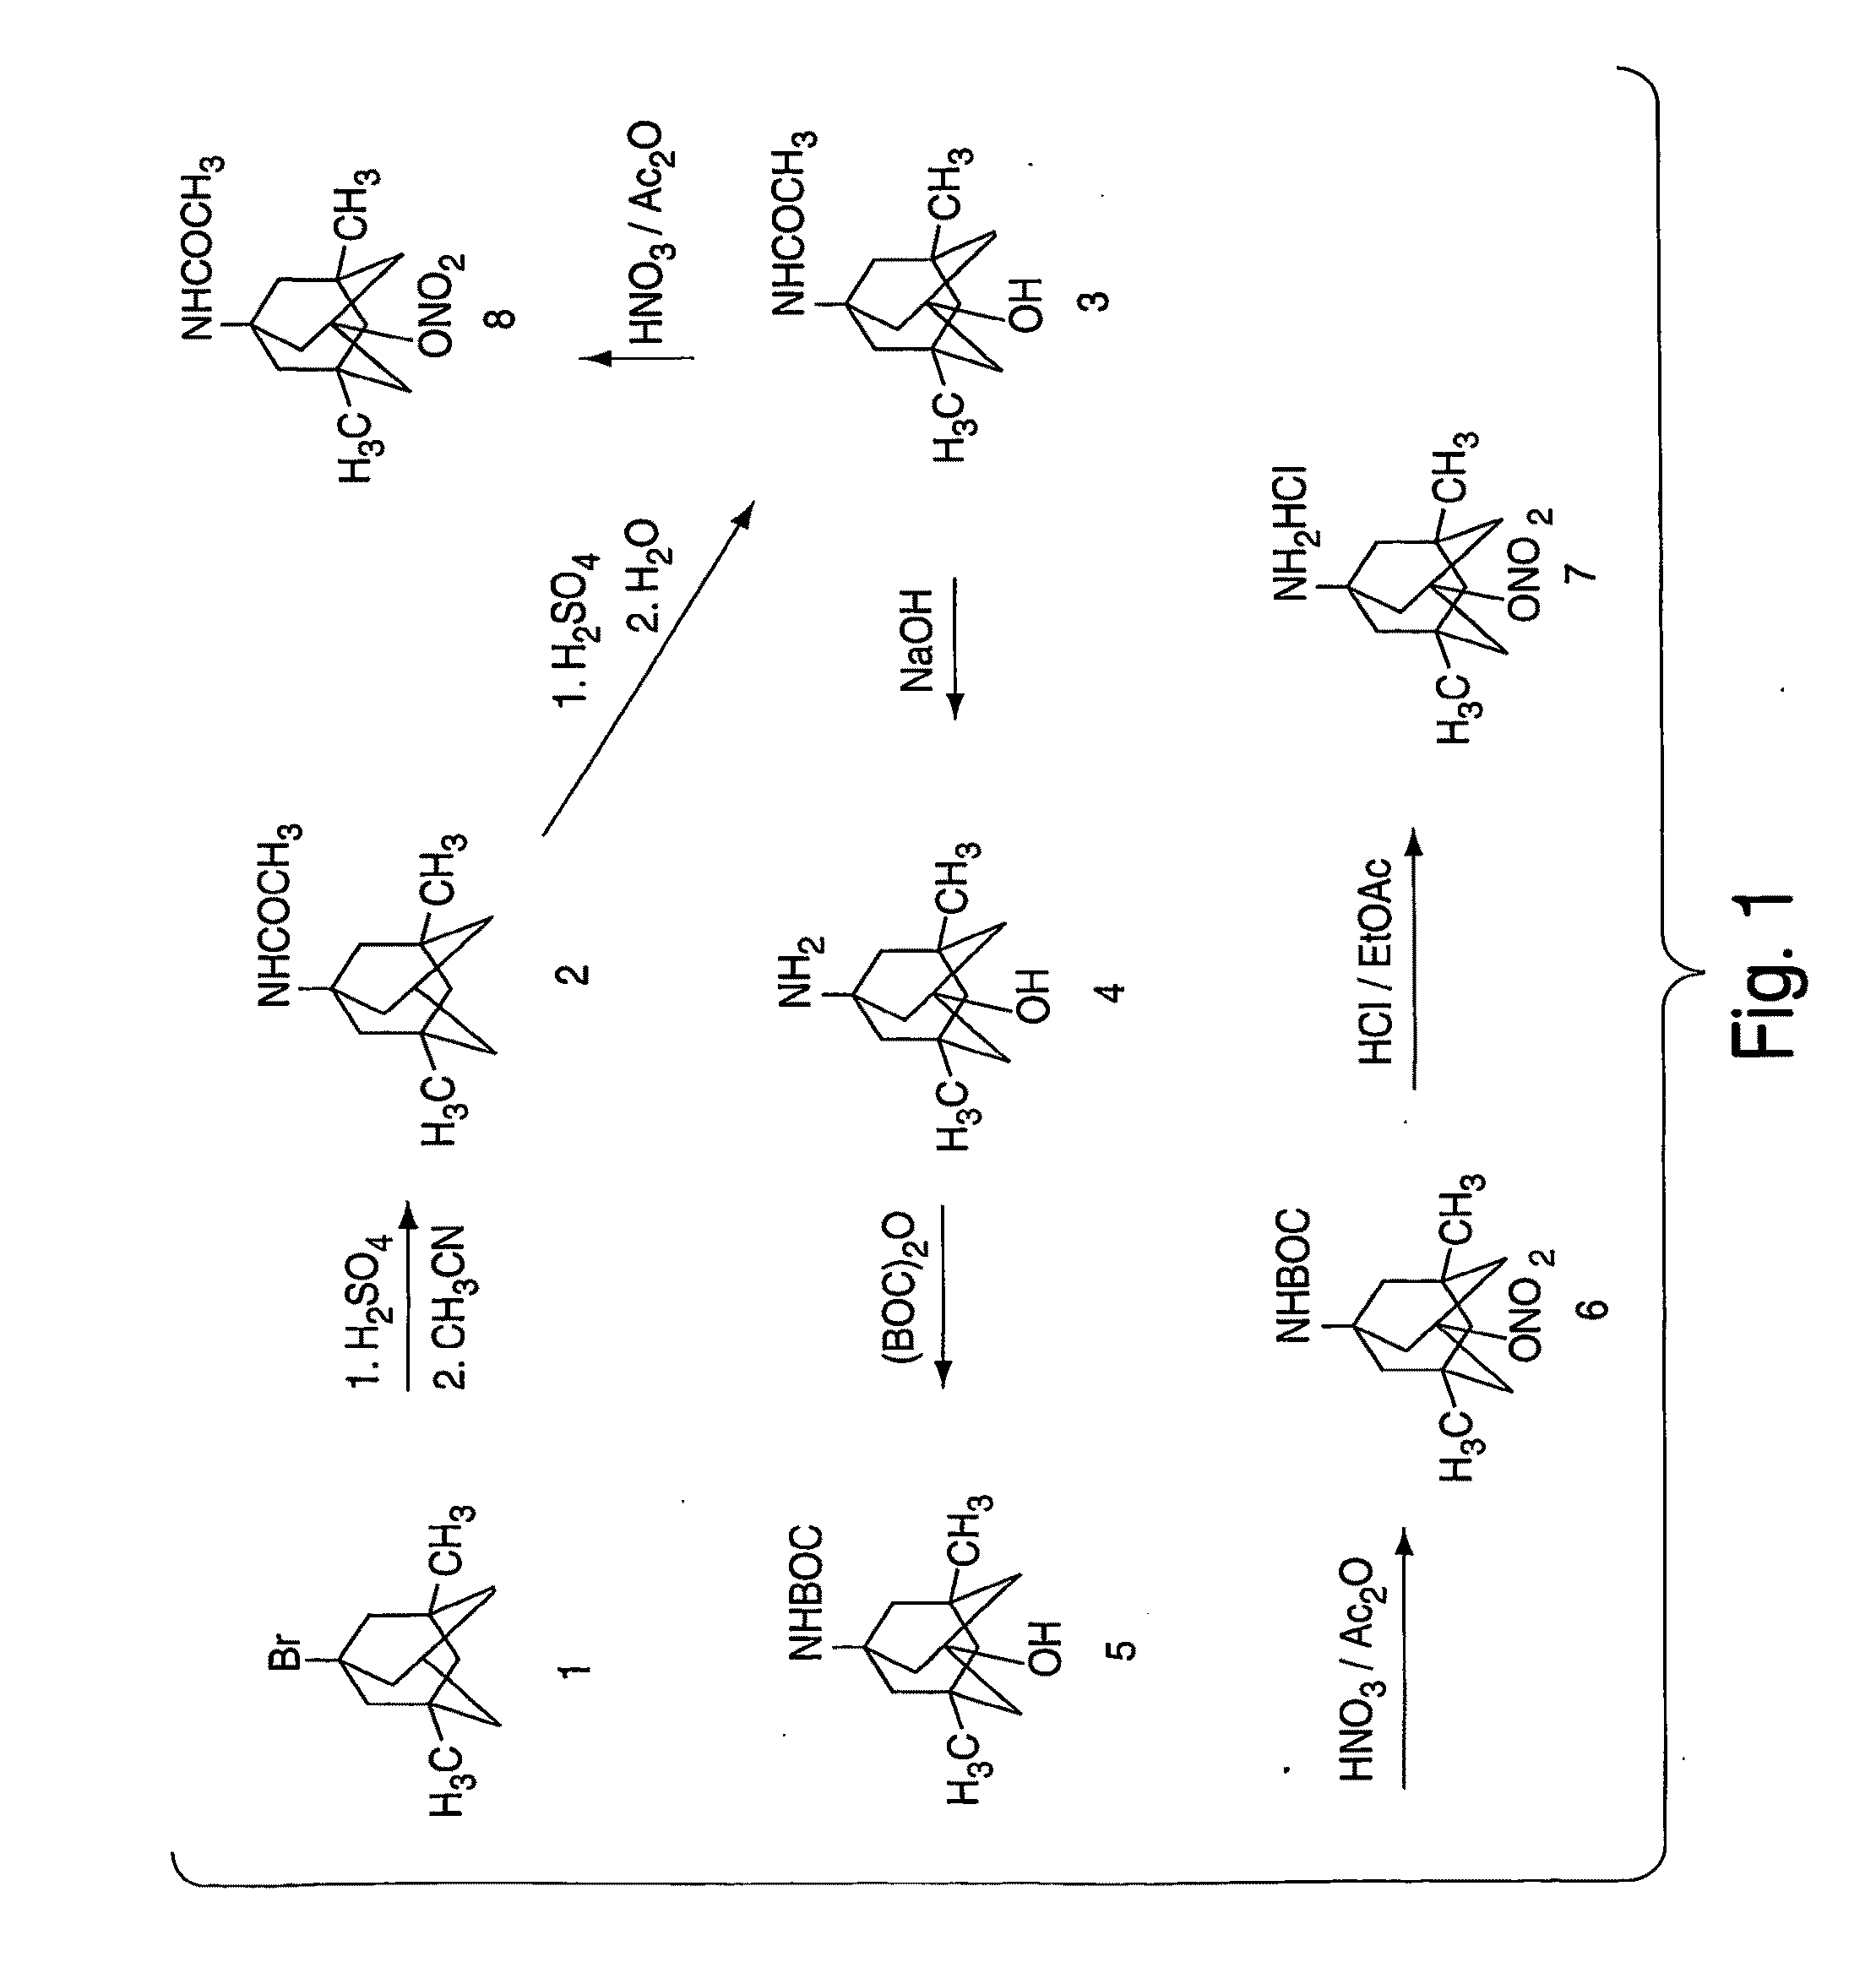 Methods for Treating Neuropsychiatric Disorders with NMDA Receptor Antagonists